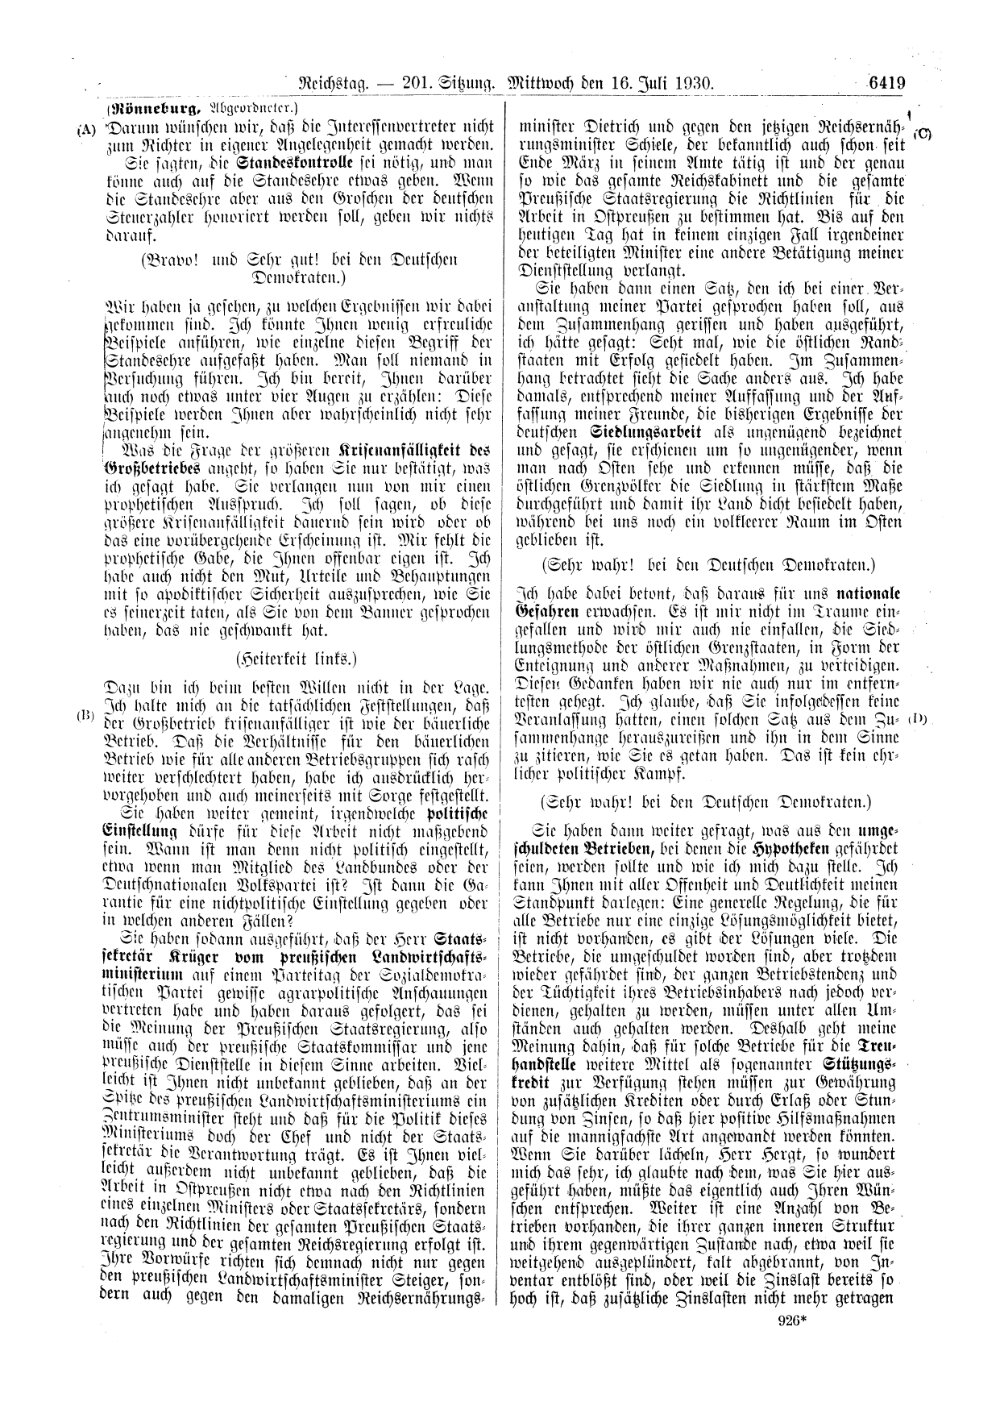 Scan of page 6419